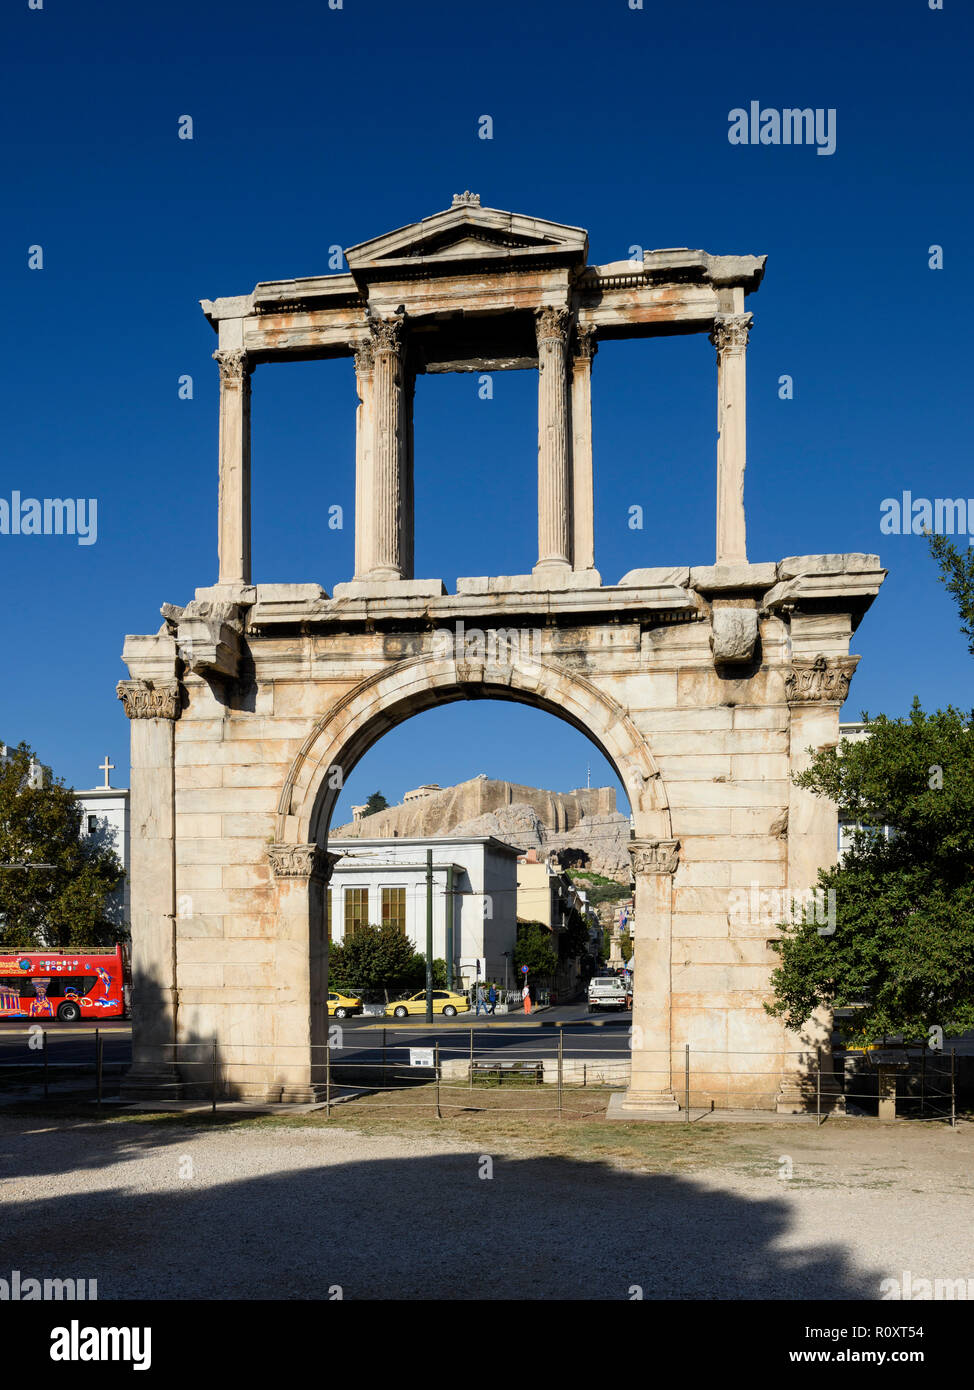 Athens. Greece. Roman Arch of Hadrian aka Hadrian's Gate, with the Parthenon and Acropolis in the background. Stock Photo